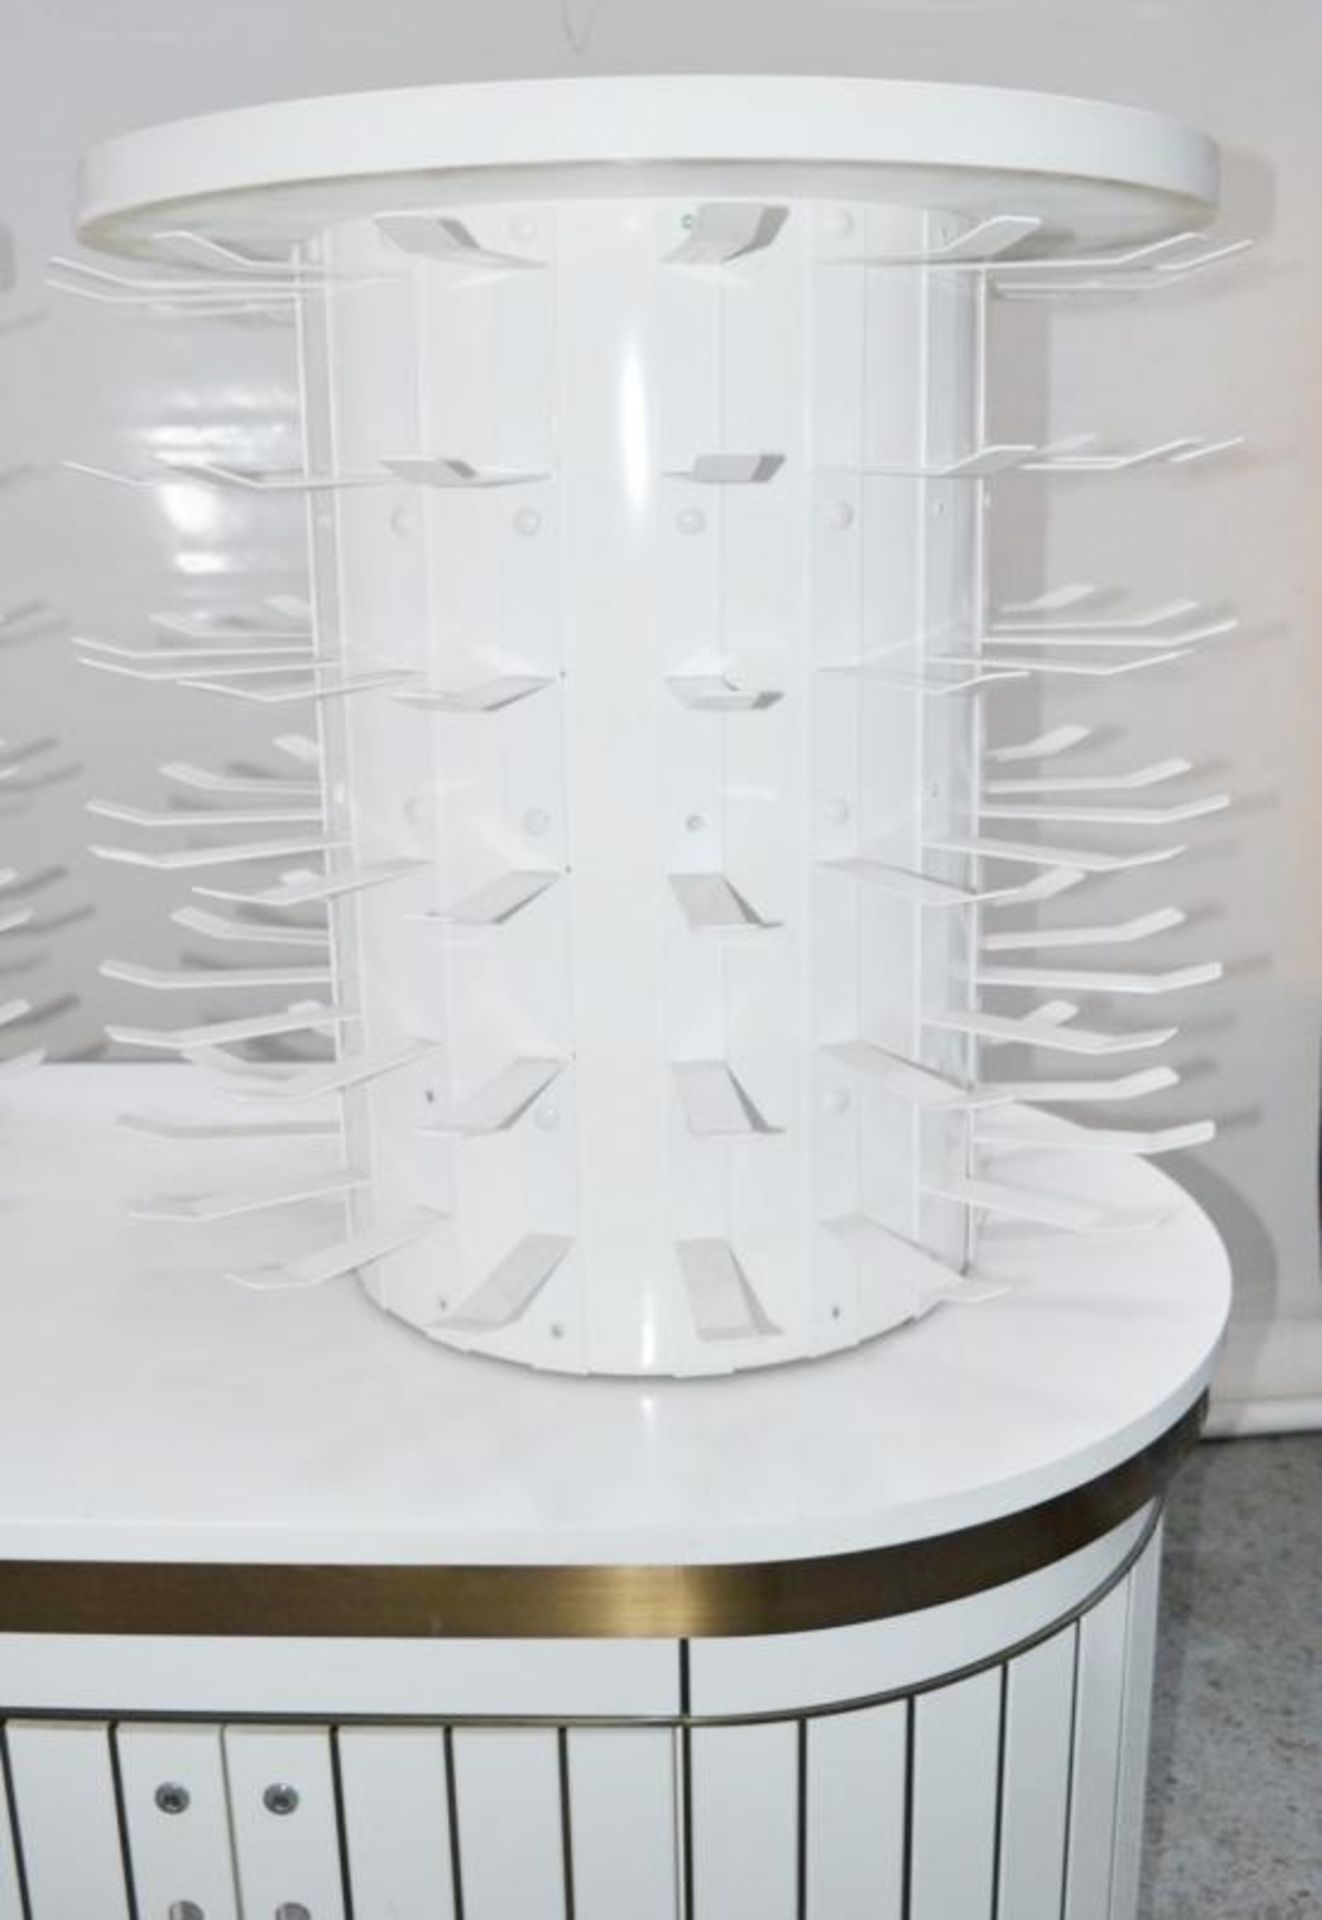 A Pair Of Curved Cosmetics Shop Counters With Revolving Carousels In White - Recently Removed From H - Image 7 of 8